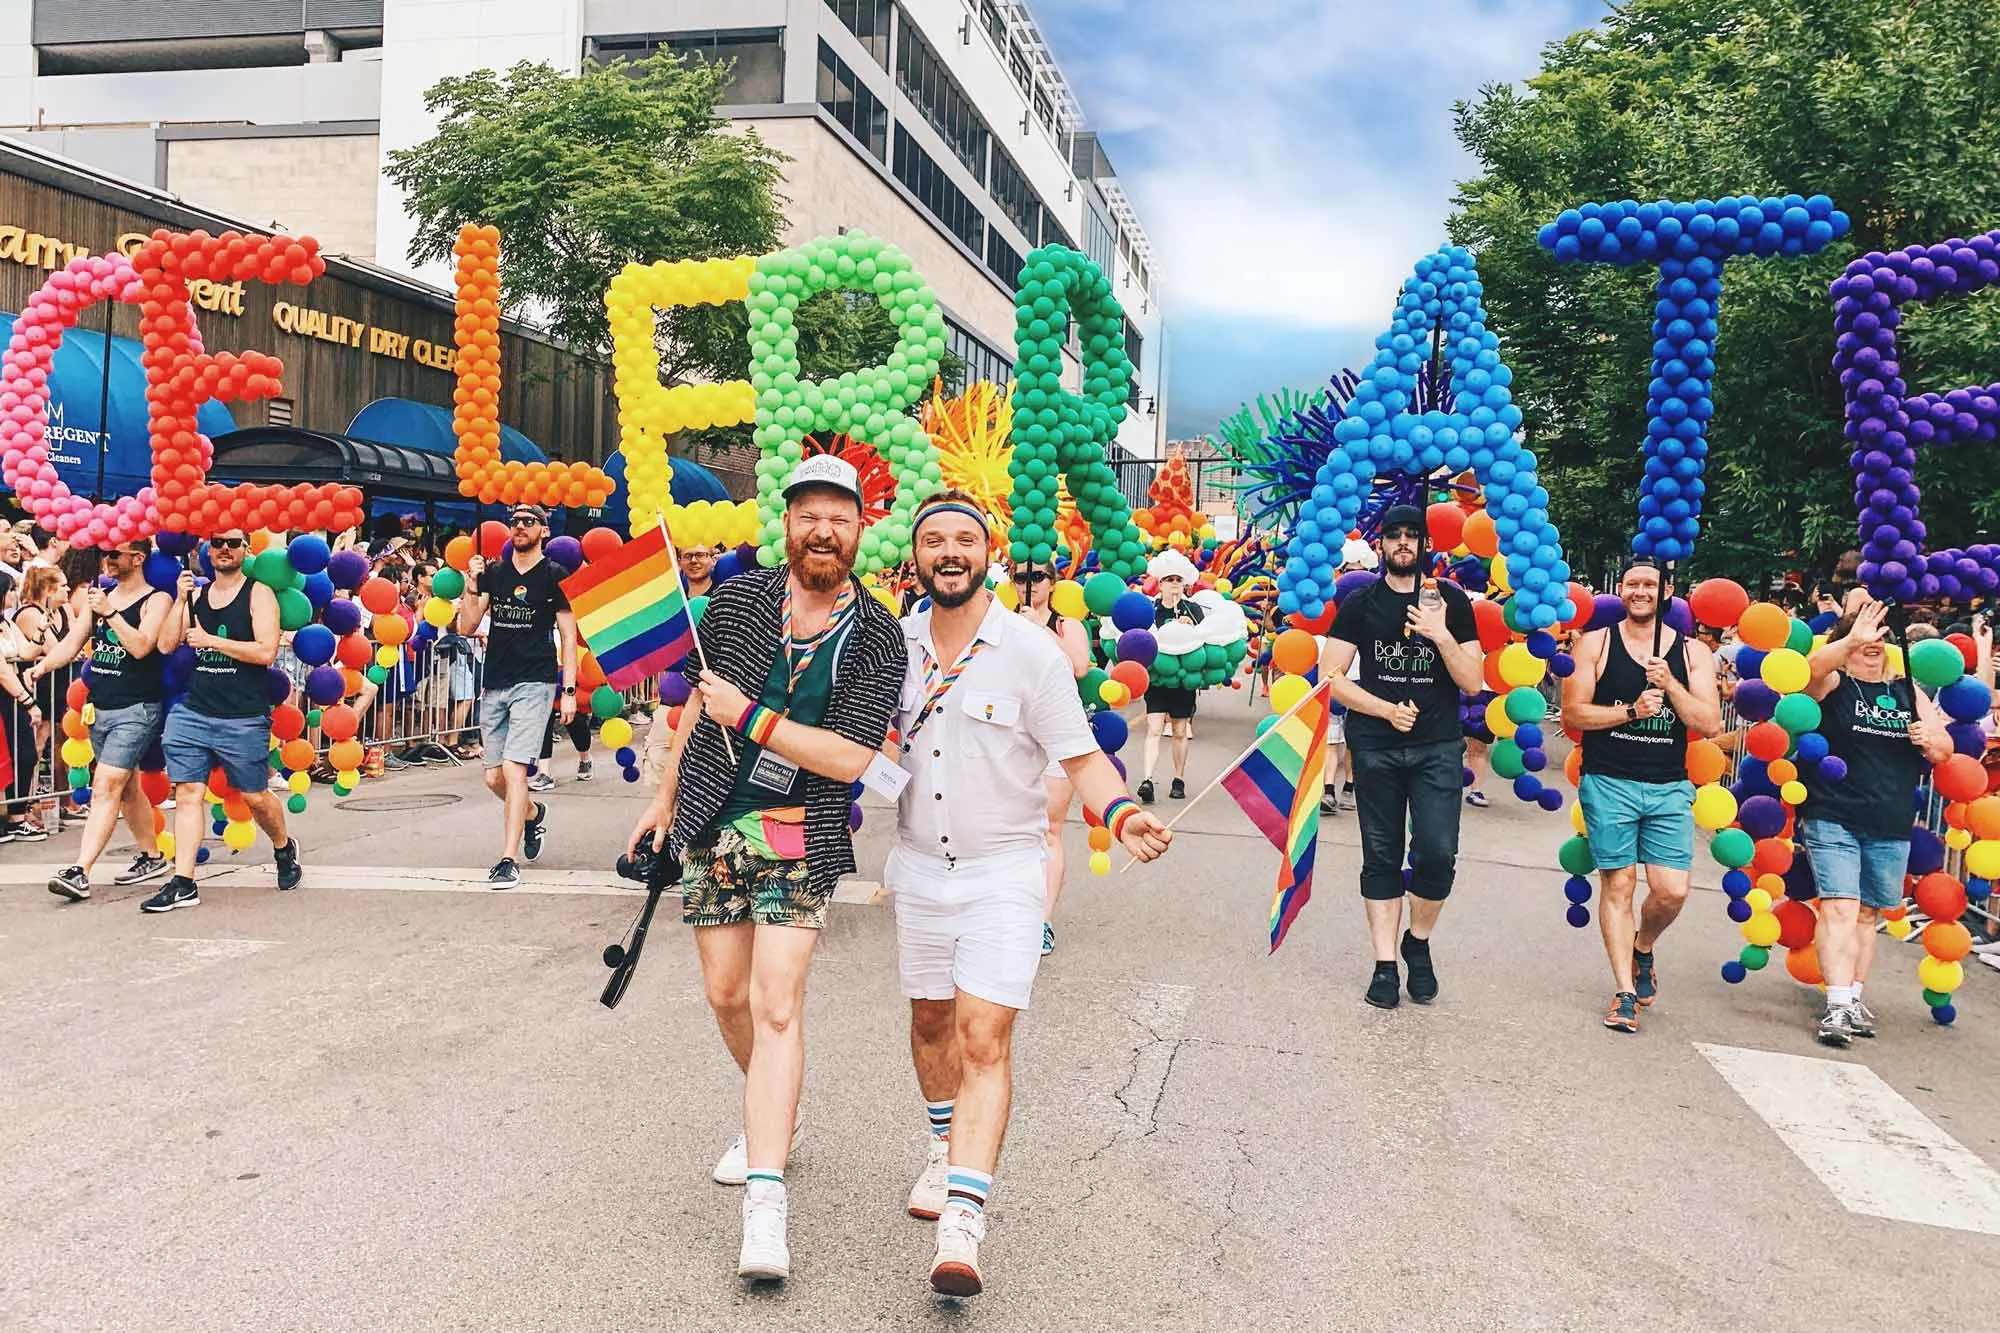 Chicago Gay City Tipps Gay Couple holding hands in front of the Rainbow Balloons Chicago Gay Pride Parade 2019 © Coupleofmen.com